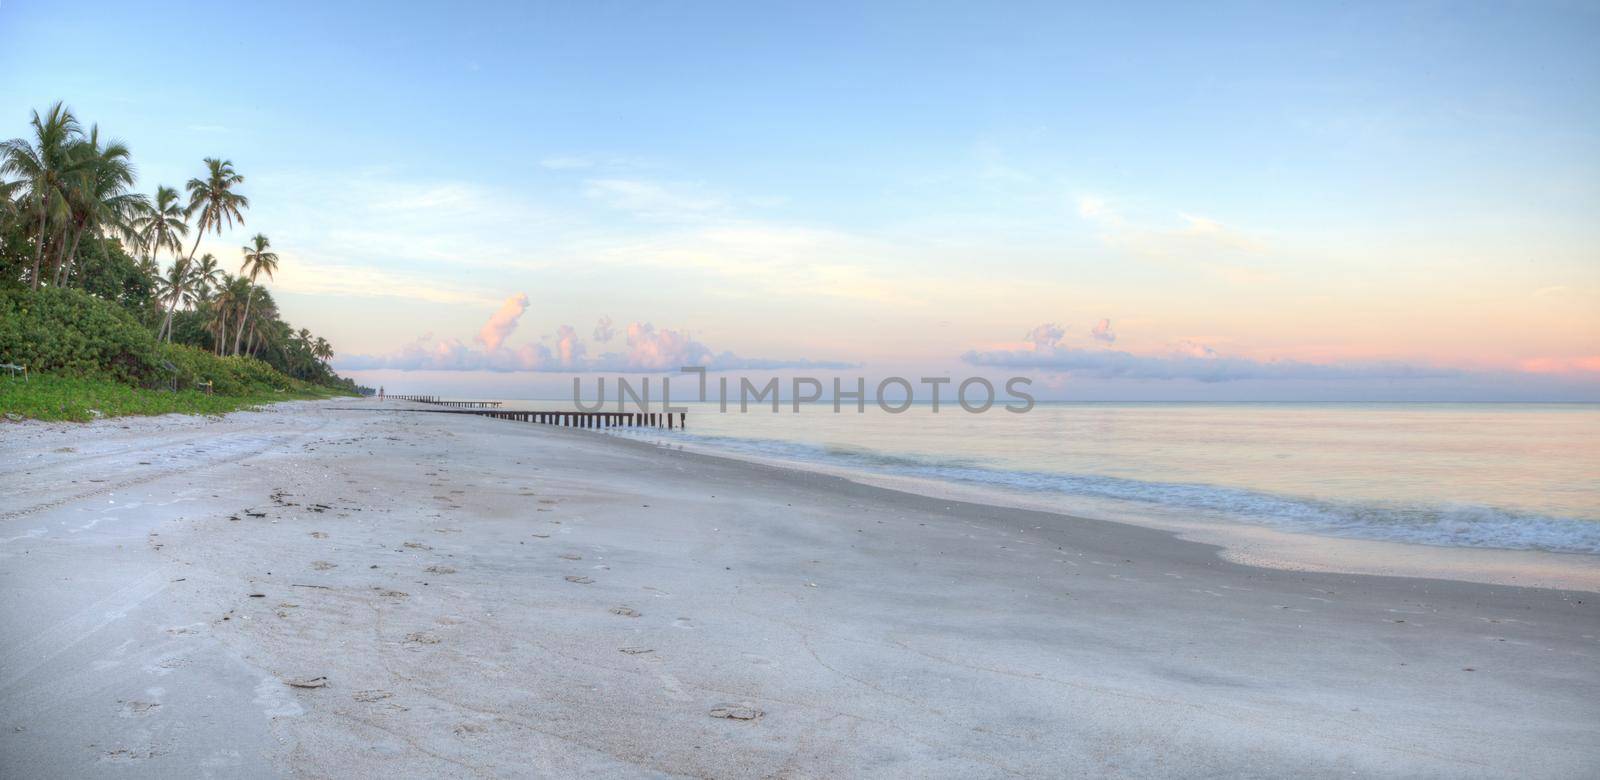 Sunrise over old pier on the ocean at Port Royal Beach in Naples, Florida.